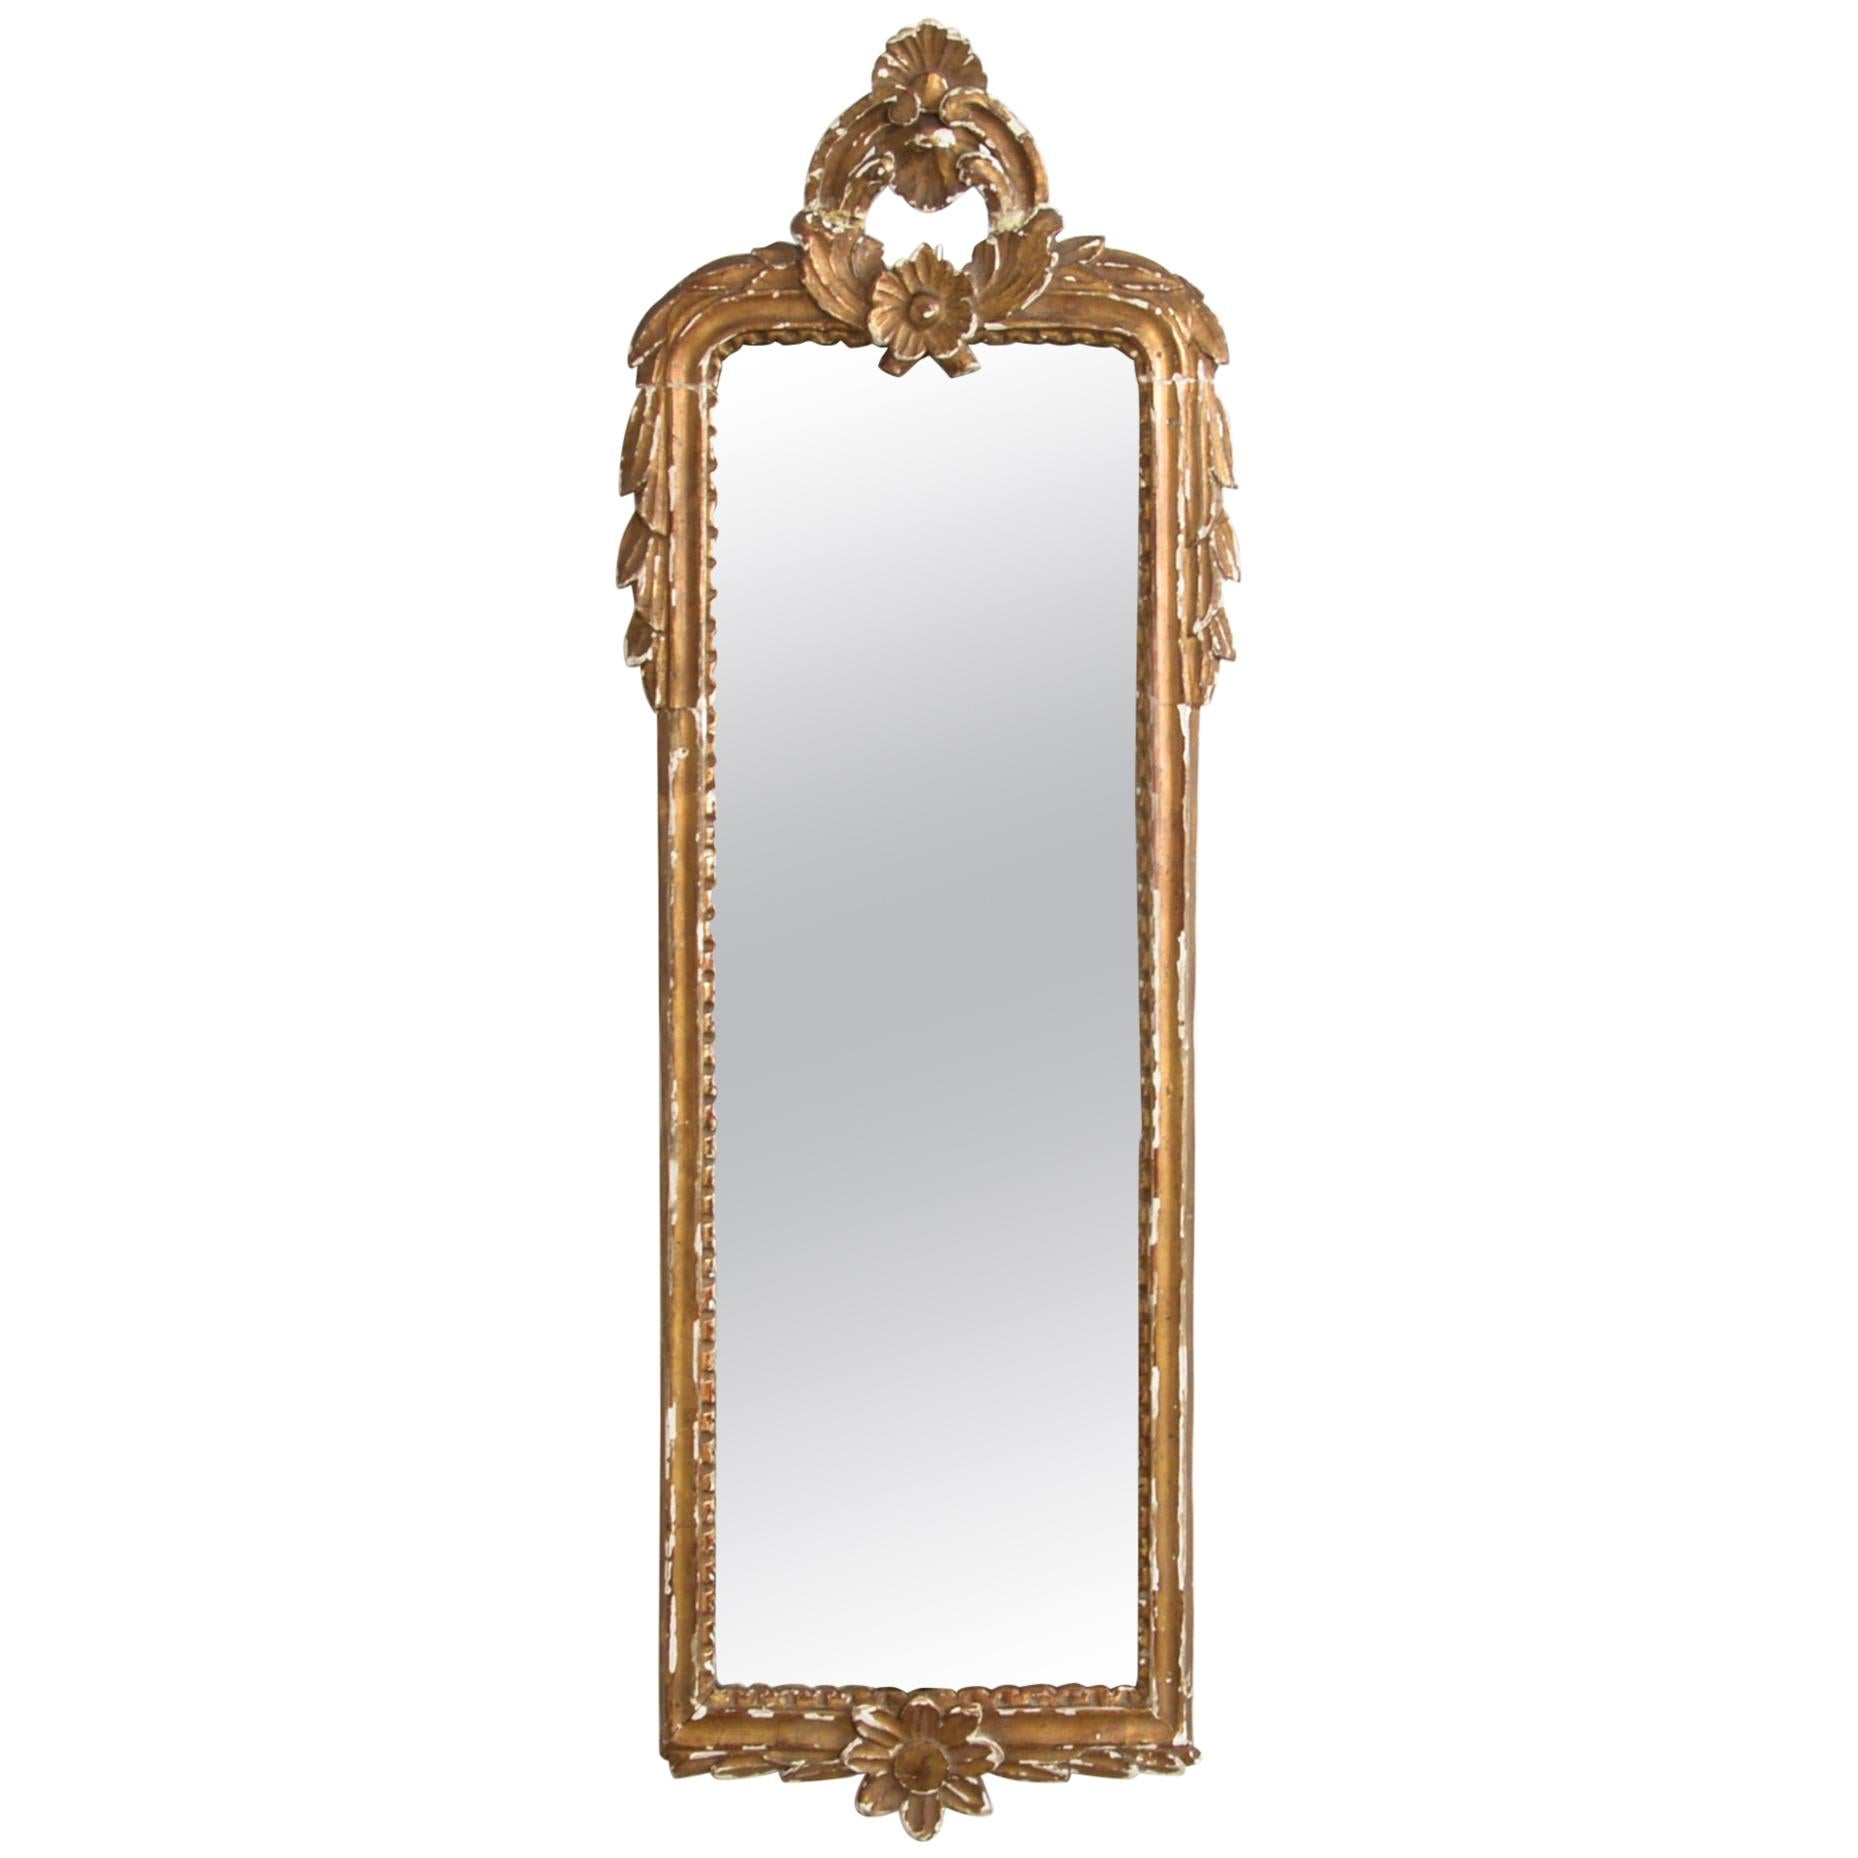 1910s Antique French Gilded Mirror